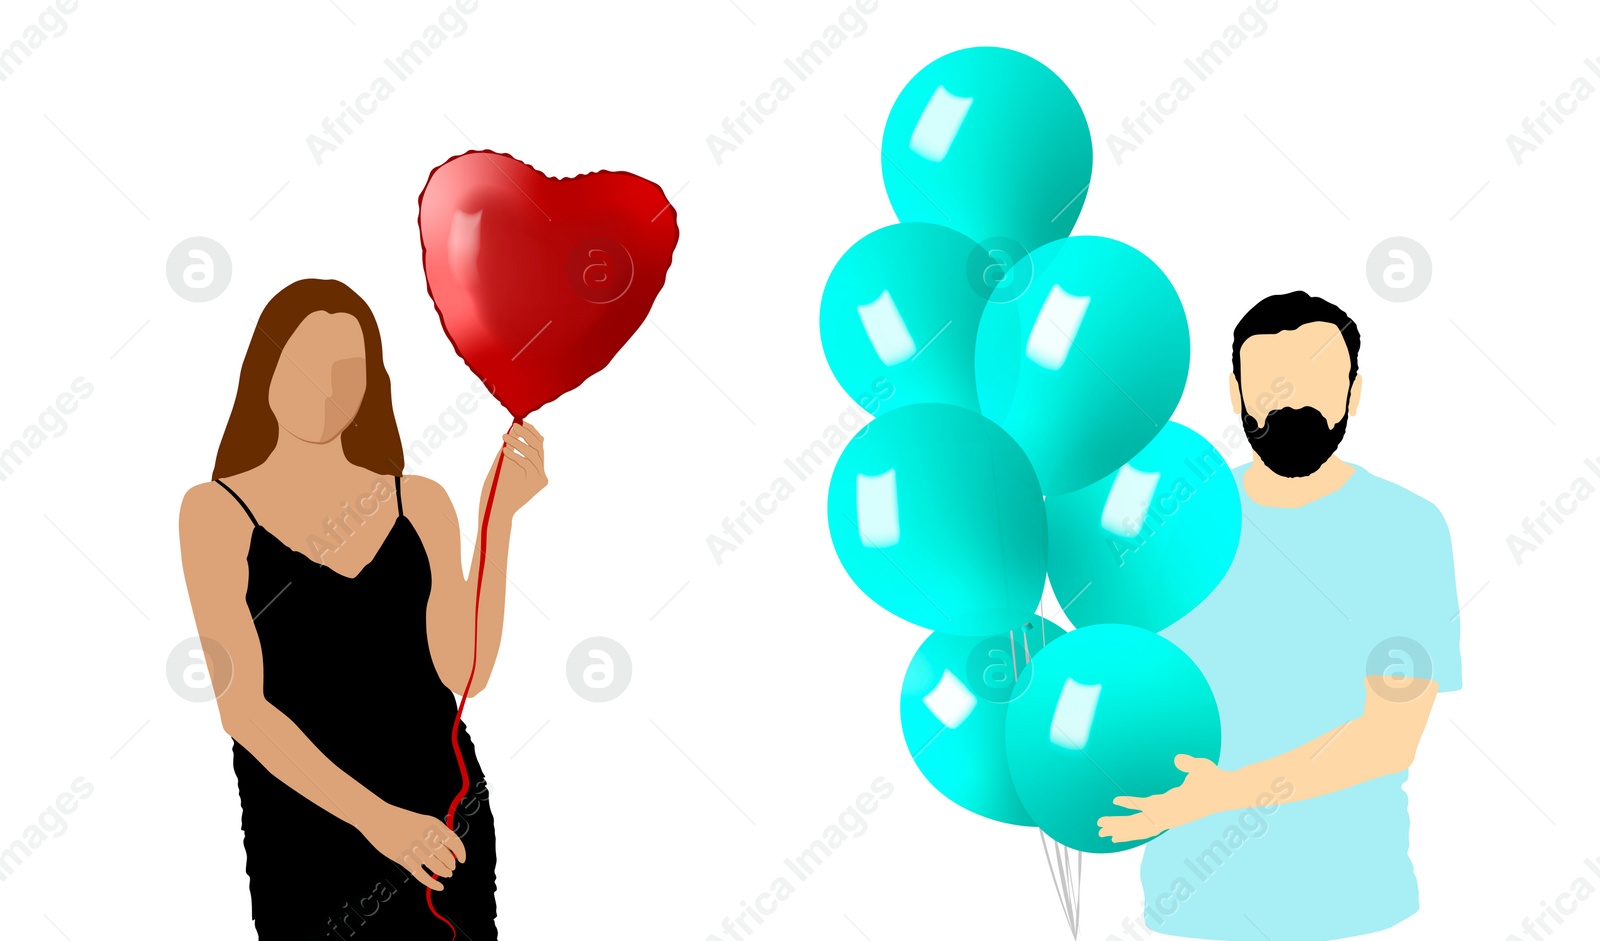 Illustration of Woman and man with air balloons on white background, collage